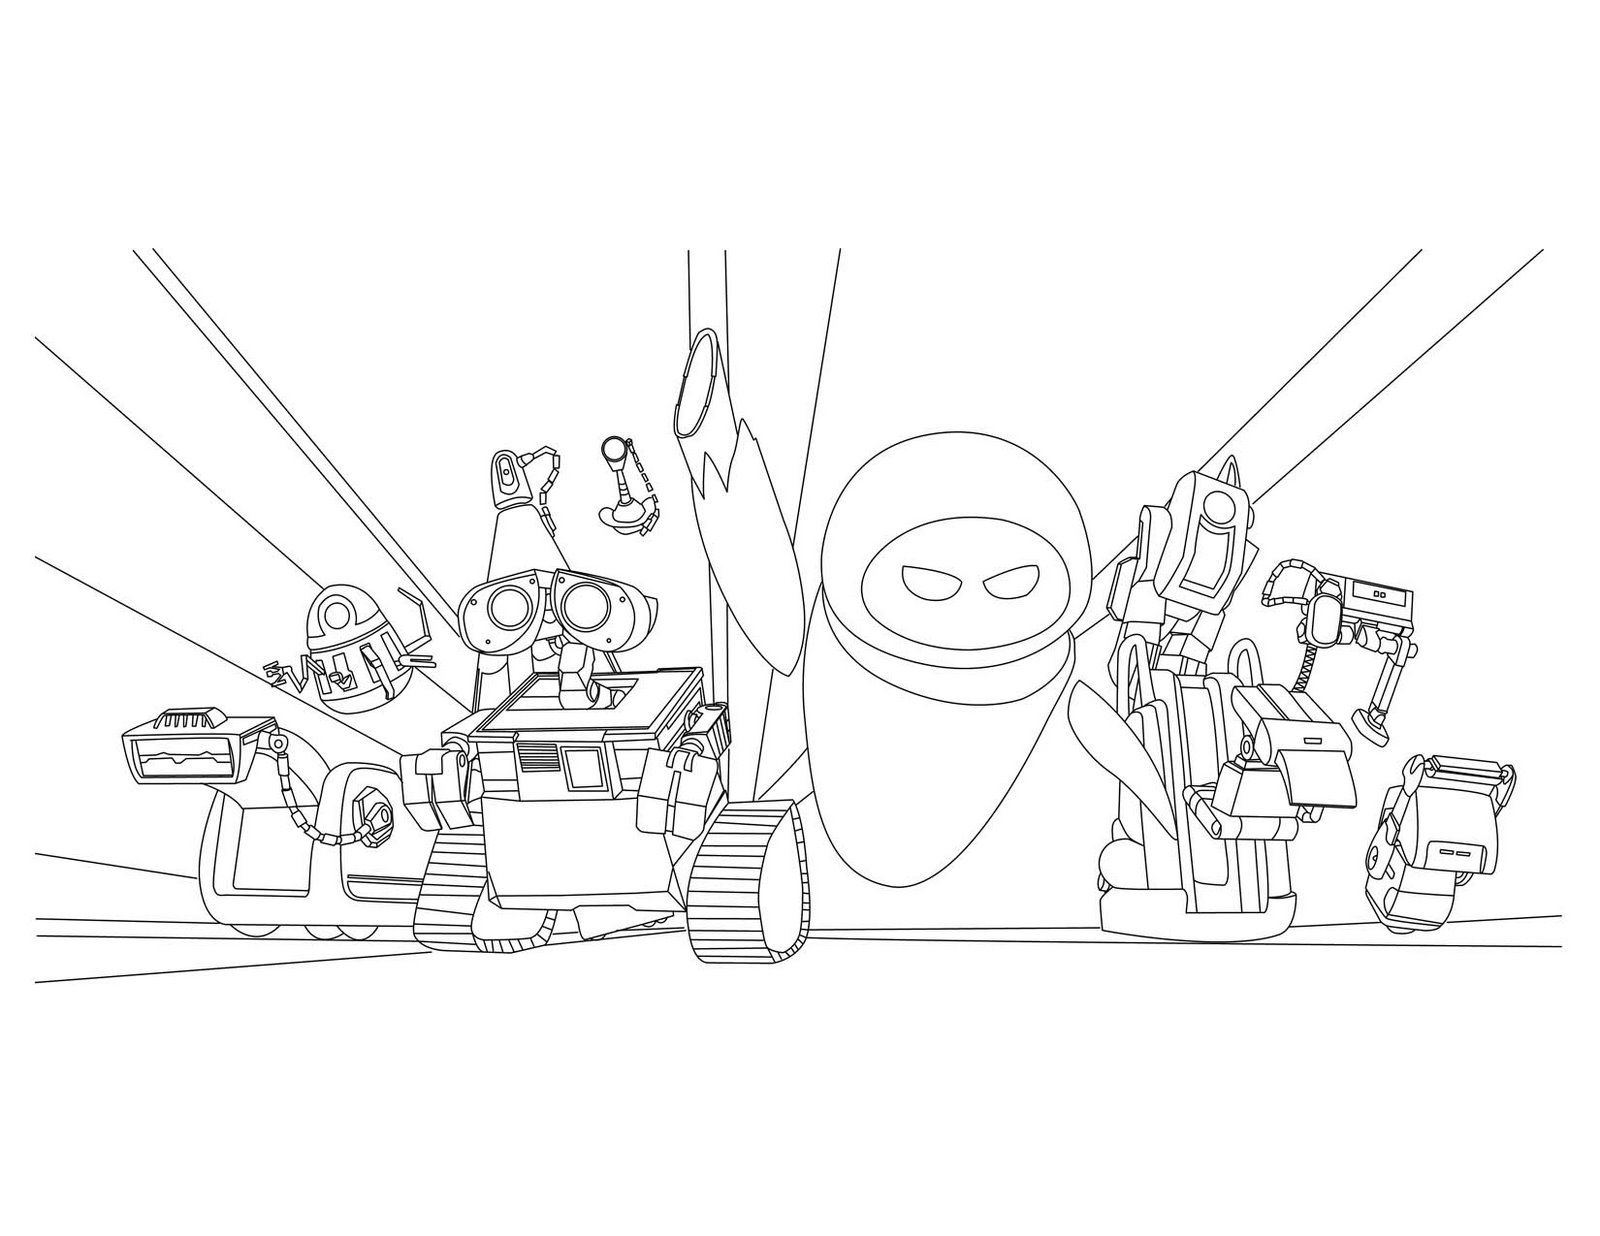 Free Wall E Coloring Pages Wall E Coloring Pages To Download And Print For Free